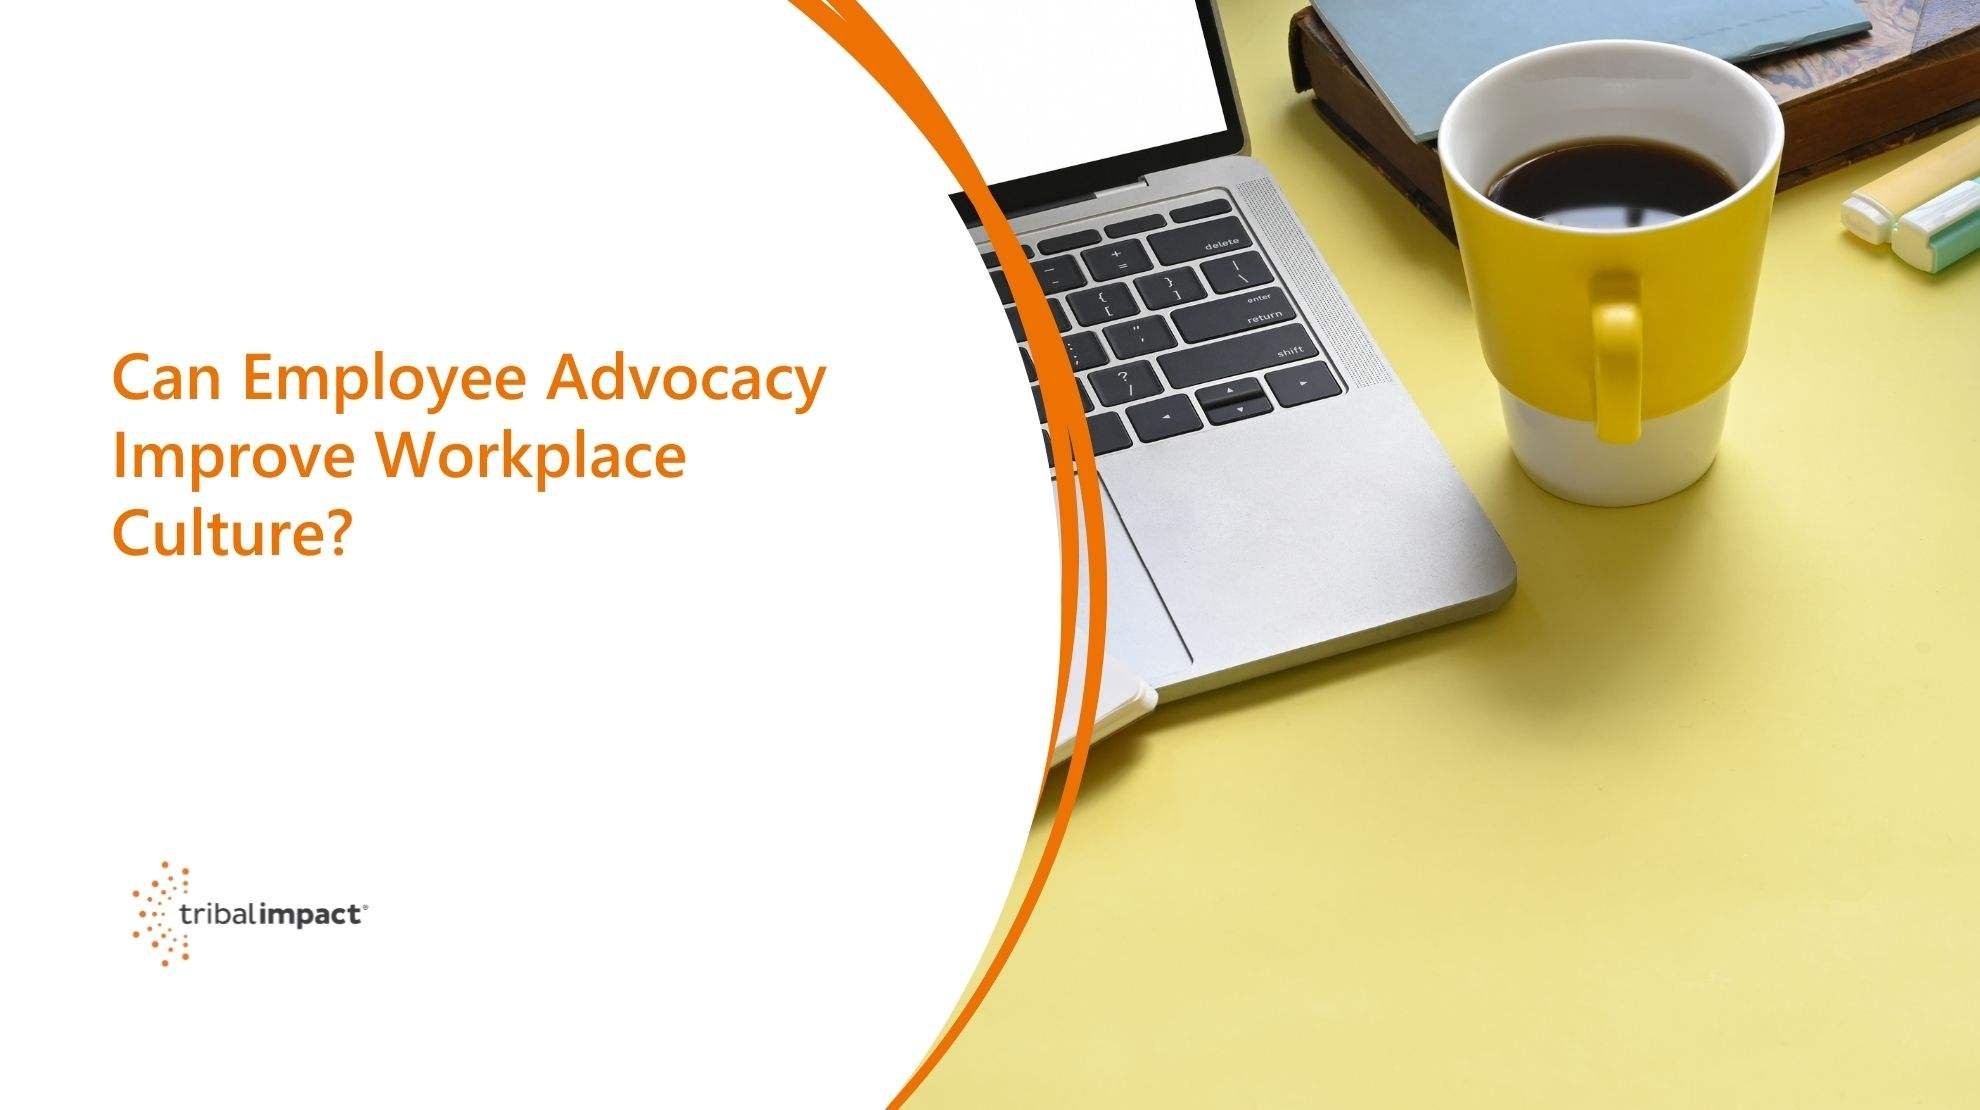 Can Employee Advocacy Improve Workplace Culture Blog Image